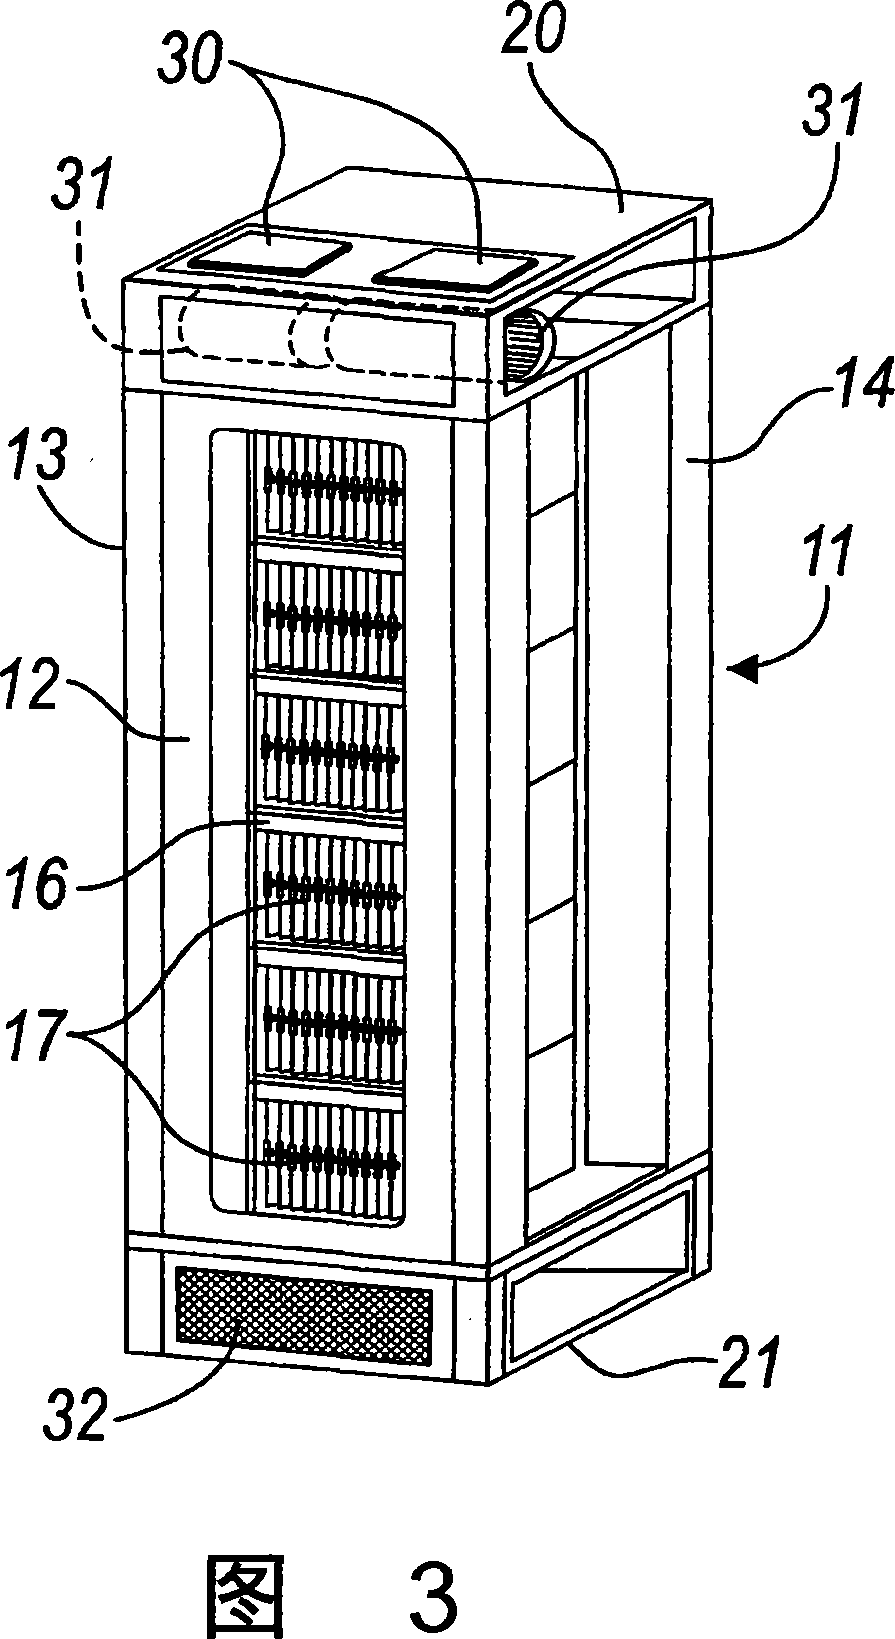 Apparatus for conditioning racks for electrical, electronic and telecommunications instruments and the like